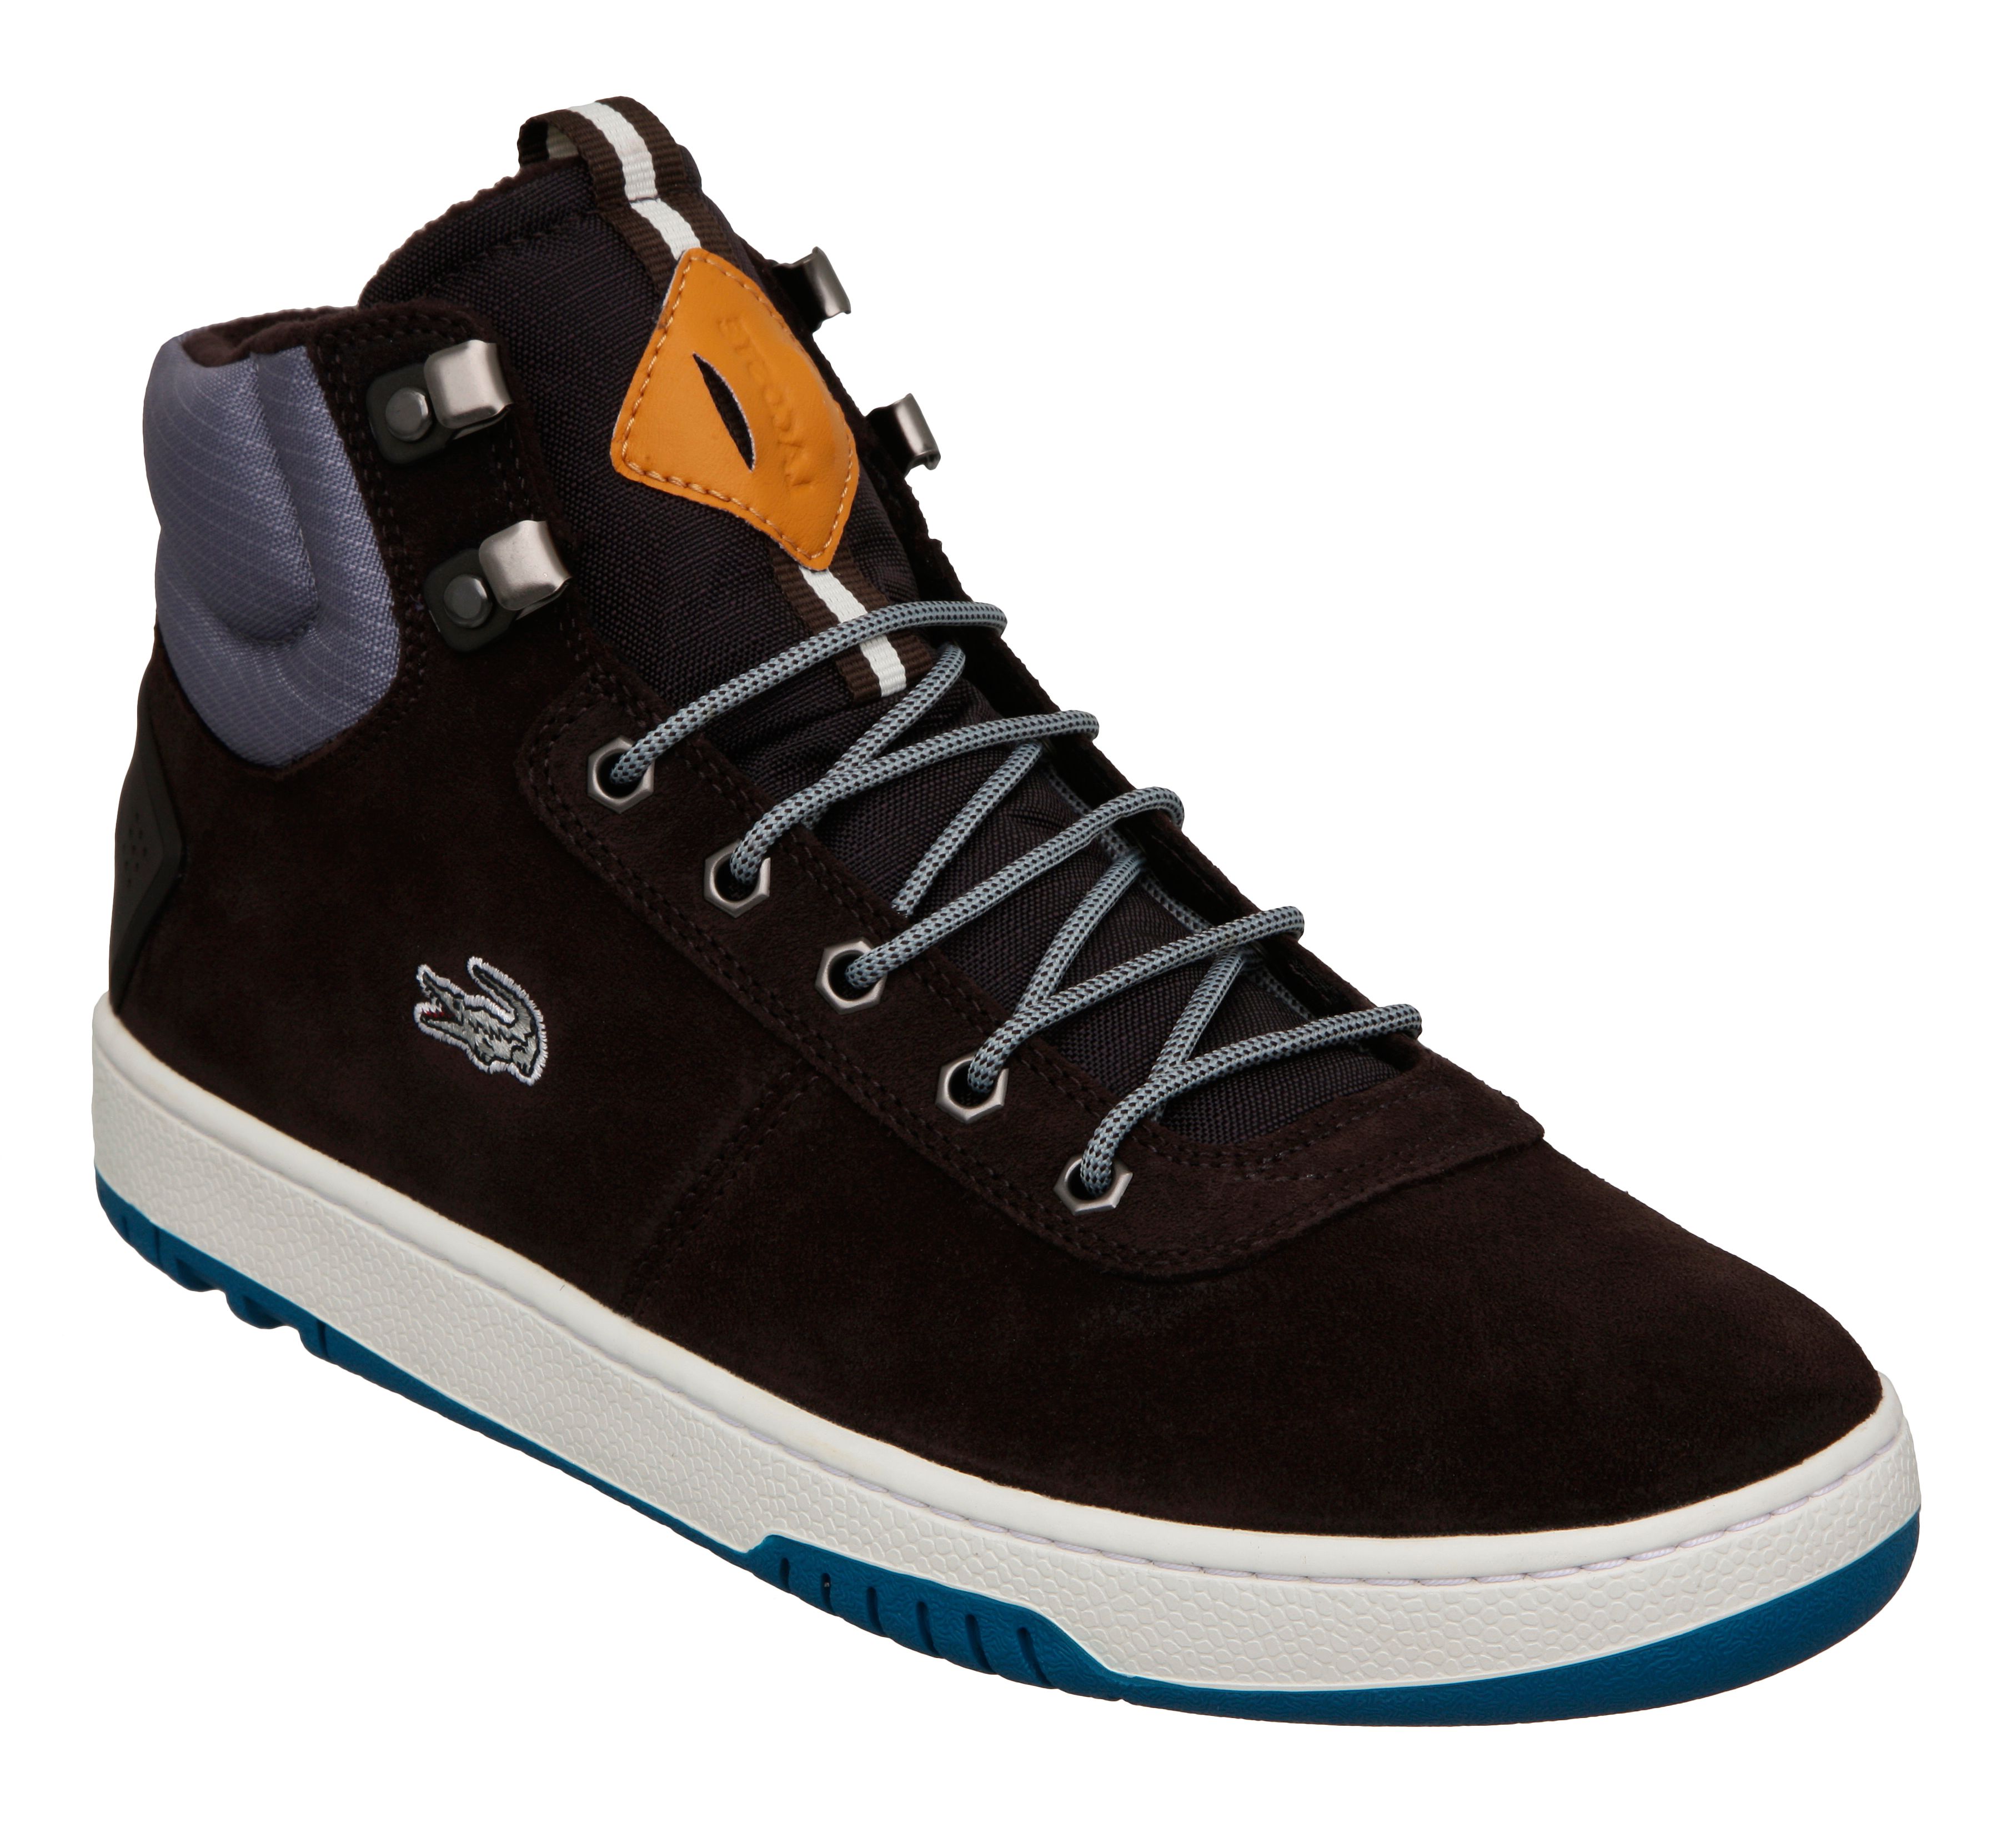 Lyst - Lacoste Raggi Ci Spm High Top Trainers in Brown for Men